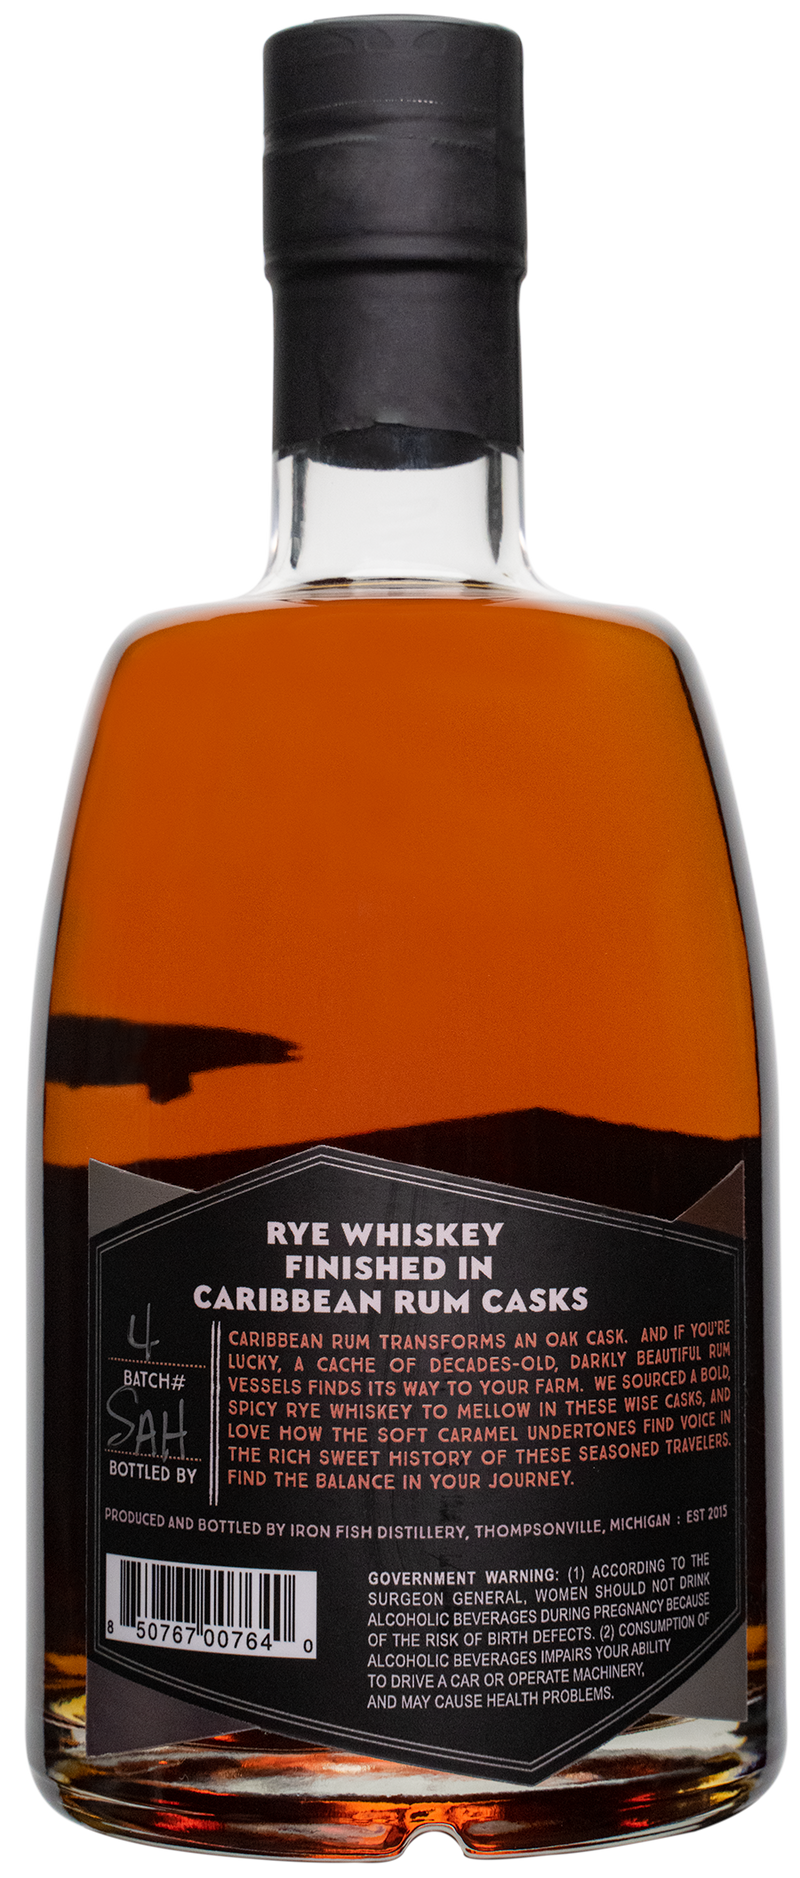 Rye Whiskey Finished in Caribbean Rum Casks